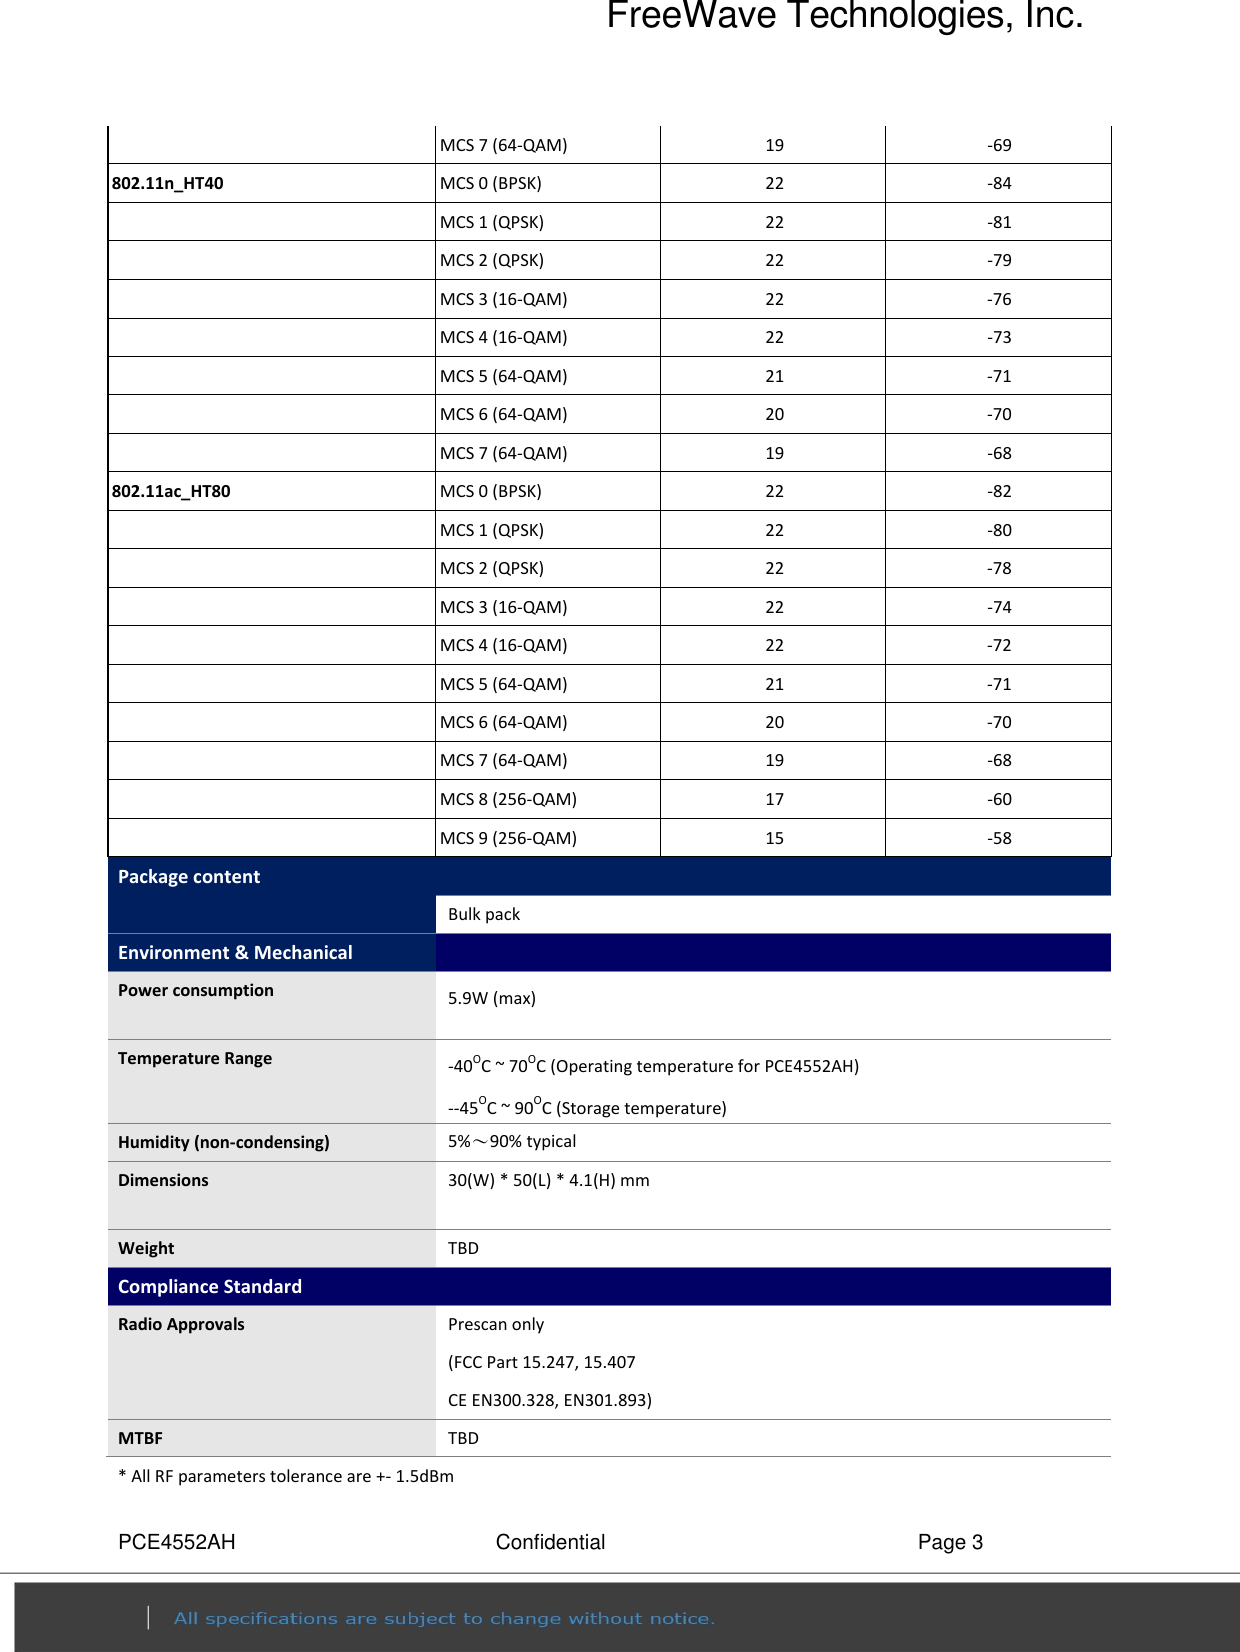 Page 3 of FreeWave Technologies PRW5000AC Wireless 802.11ac/b/g/n access point User Manual PCE4552AH specification v0 2